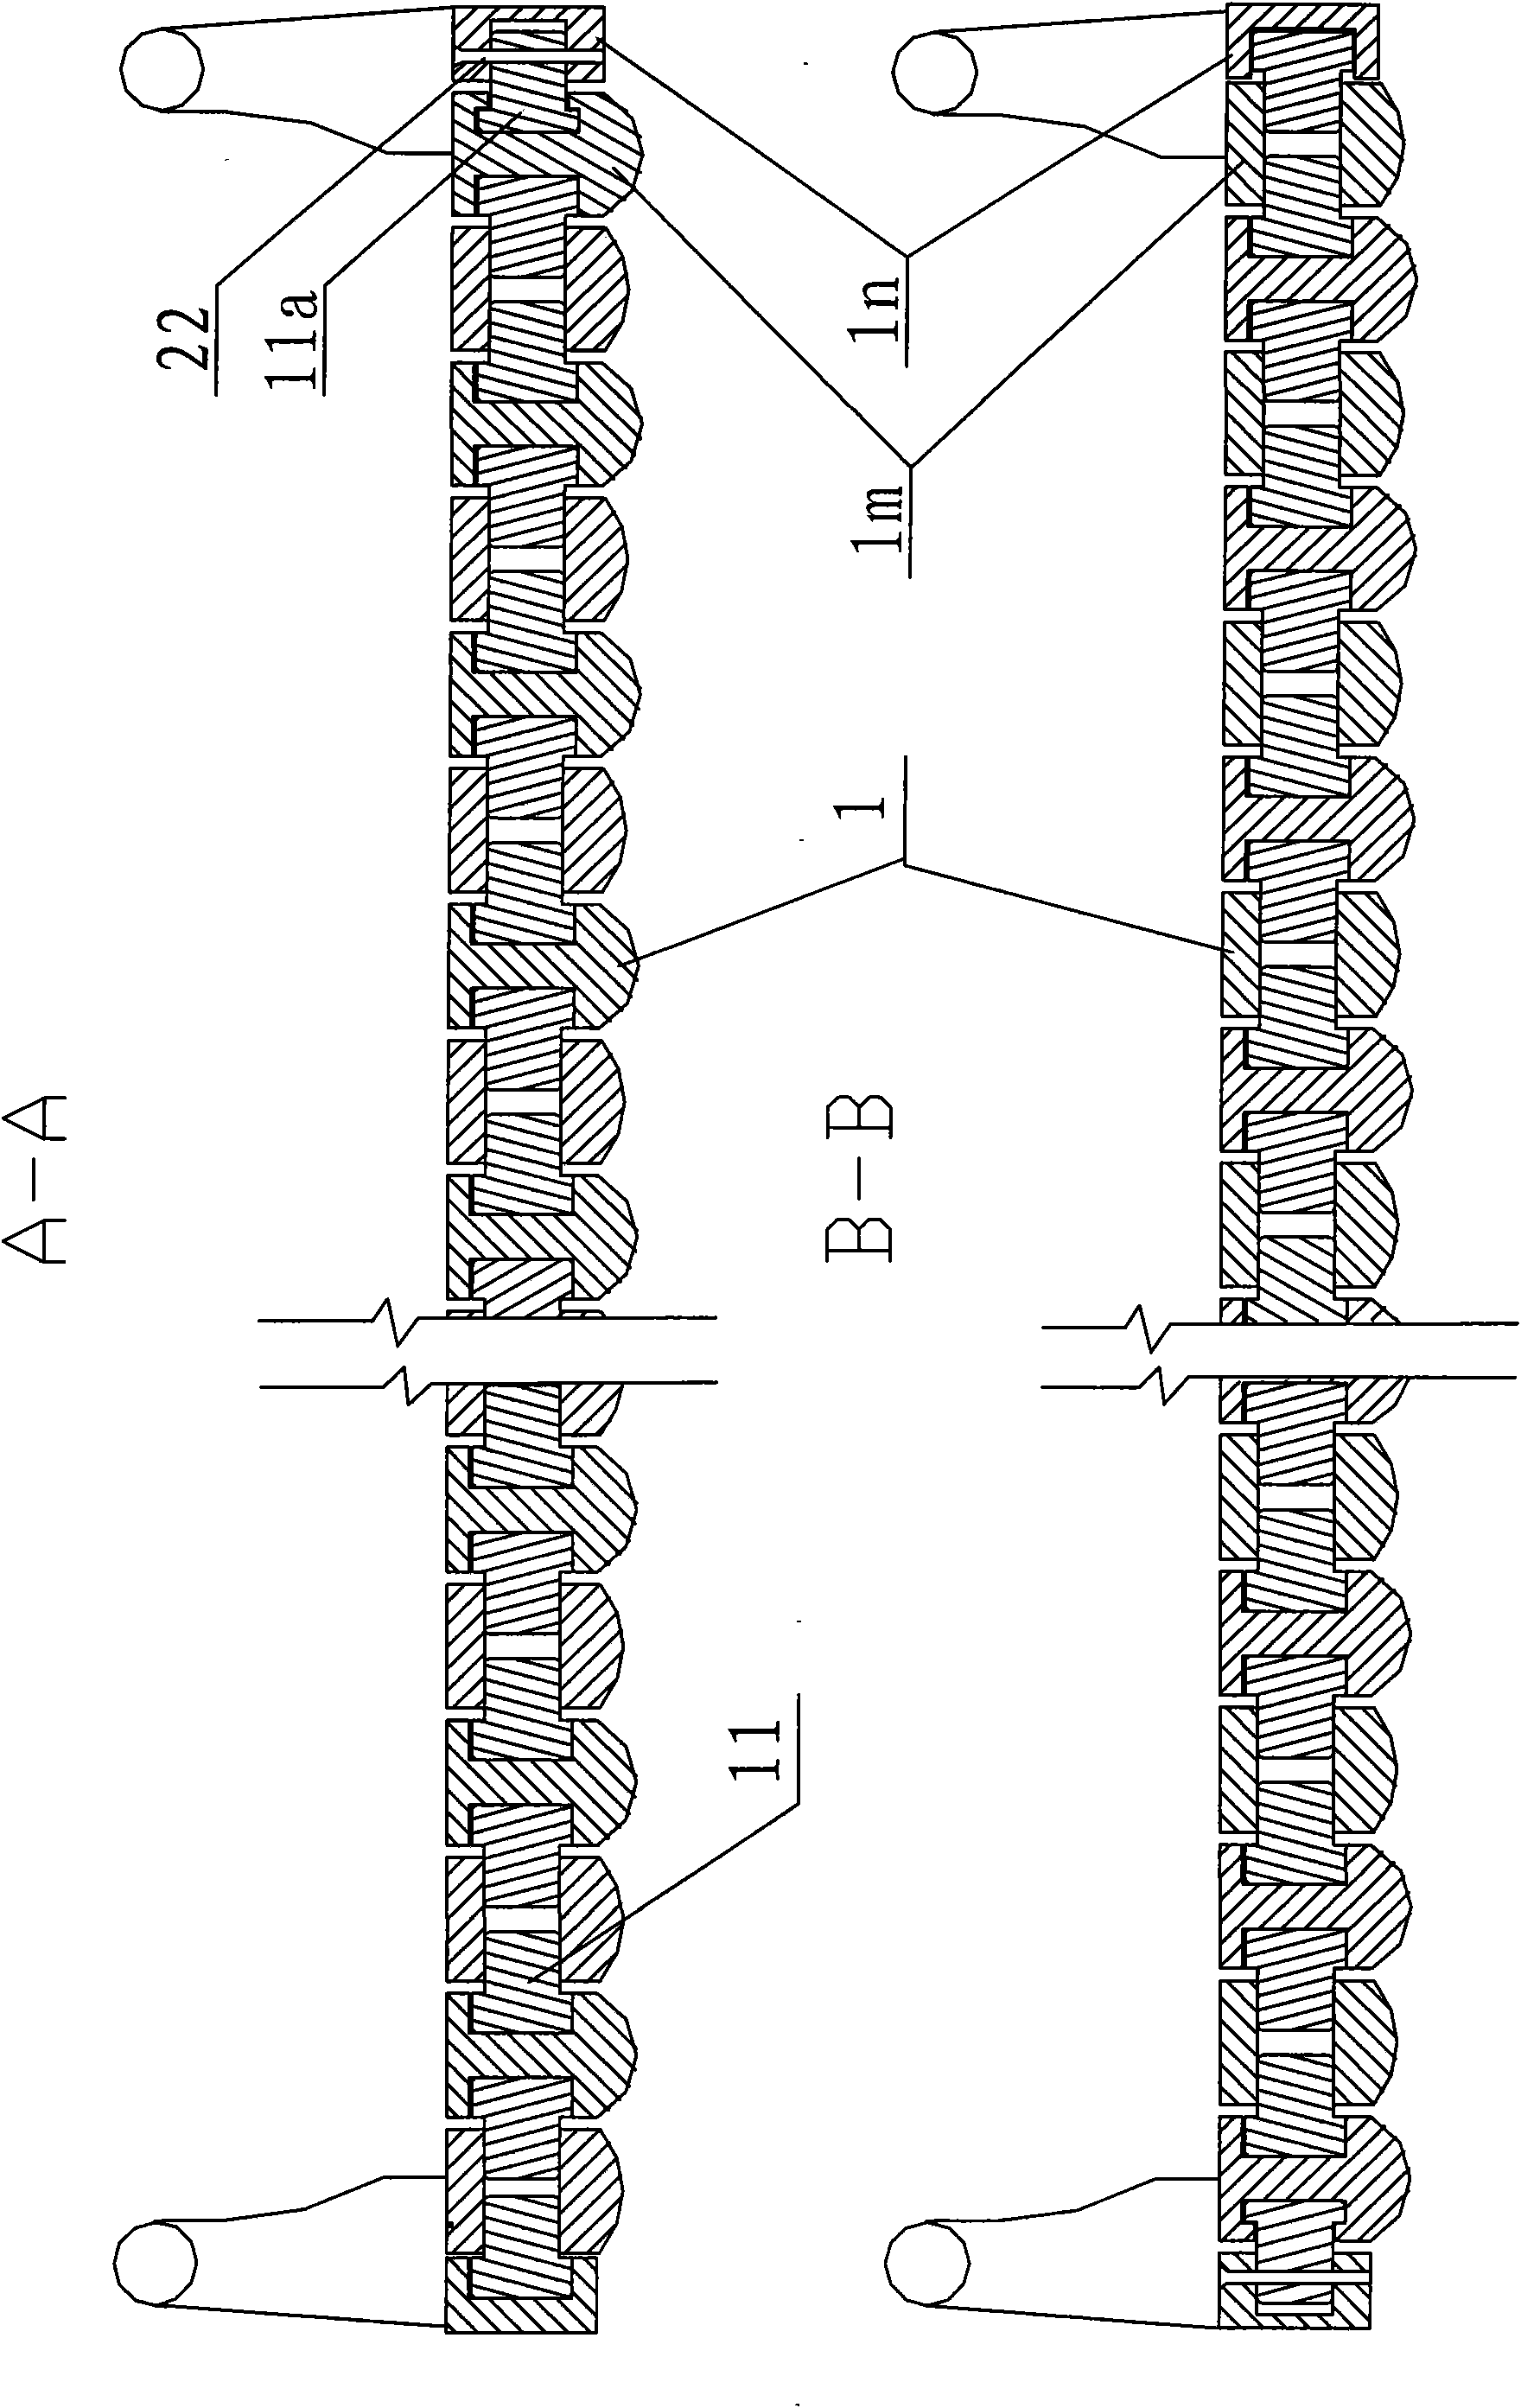 Mutual support type bridge expansion device